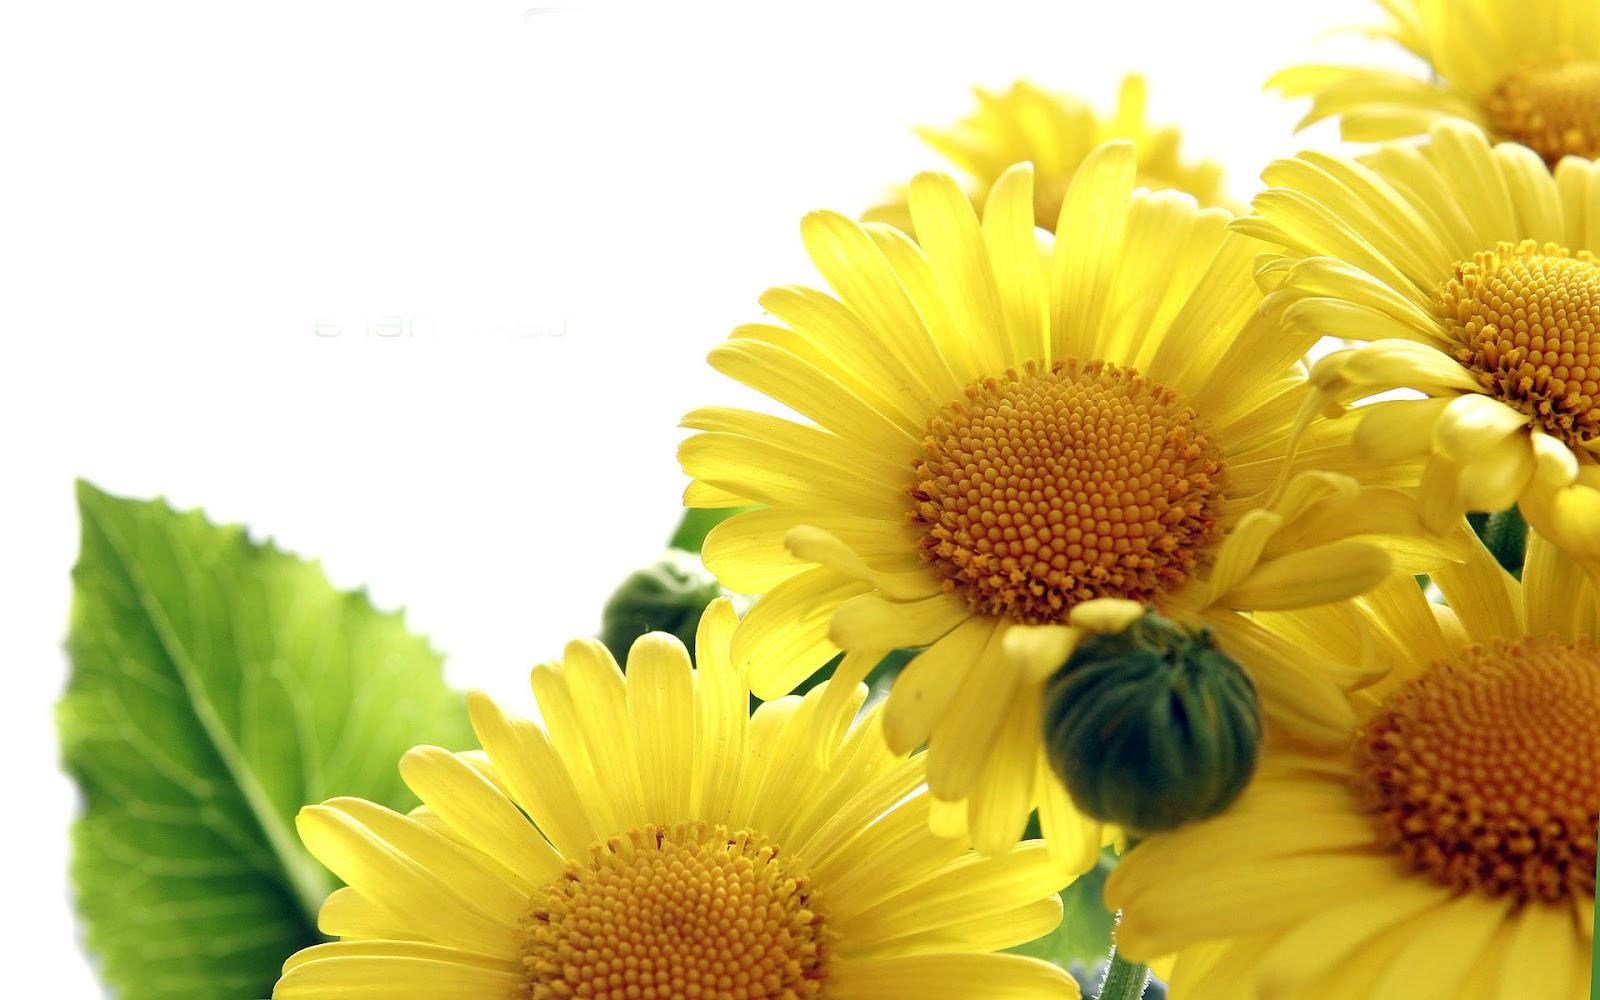 Cute Sunflower Wallpaper Attractive Sunflower Macro Wallpaper High Definition Wallpaper For Facebook Desktop Mobile Free Download Laptop With Quotes